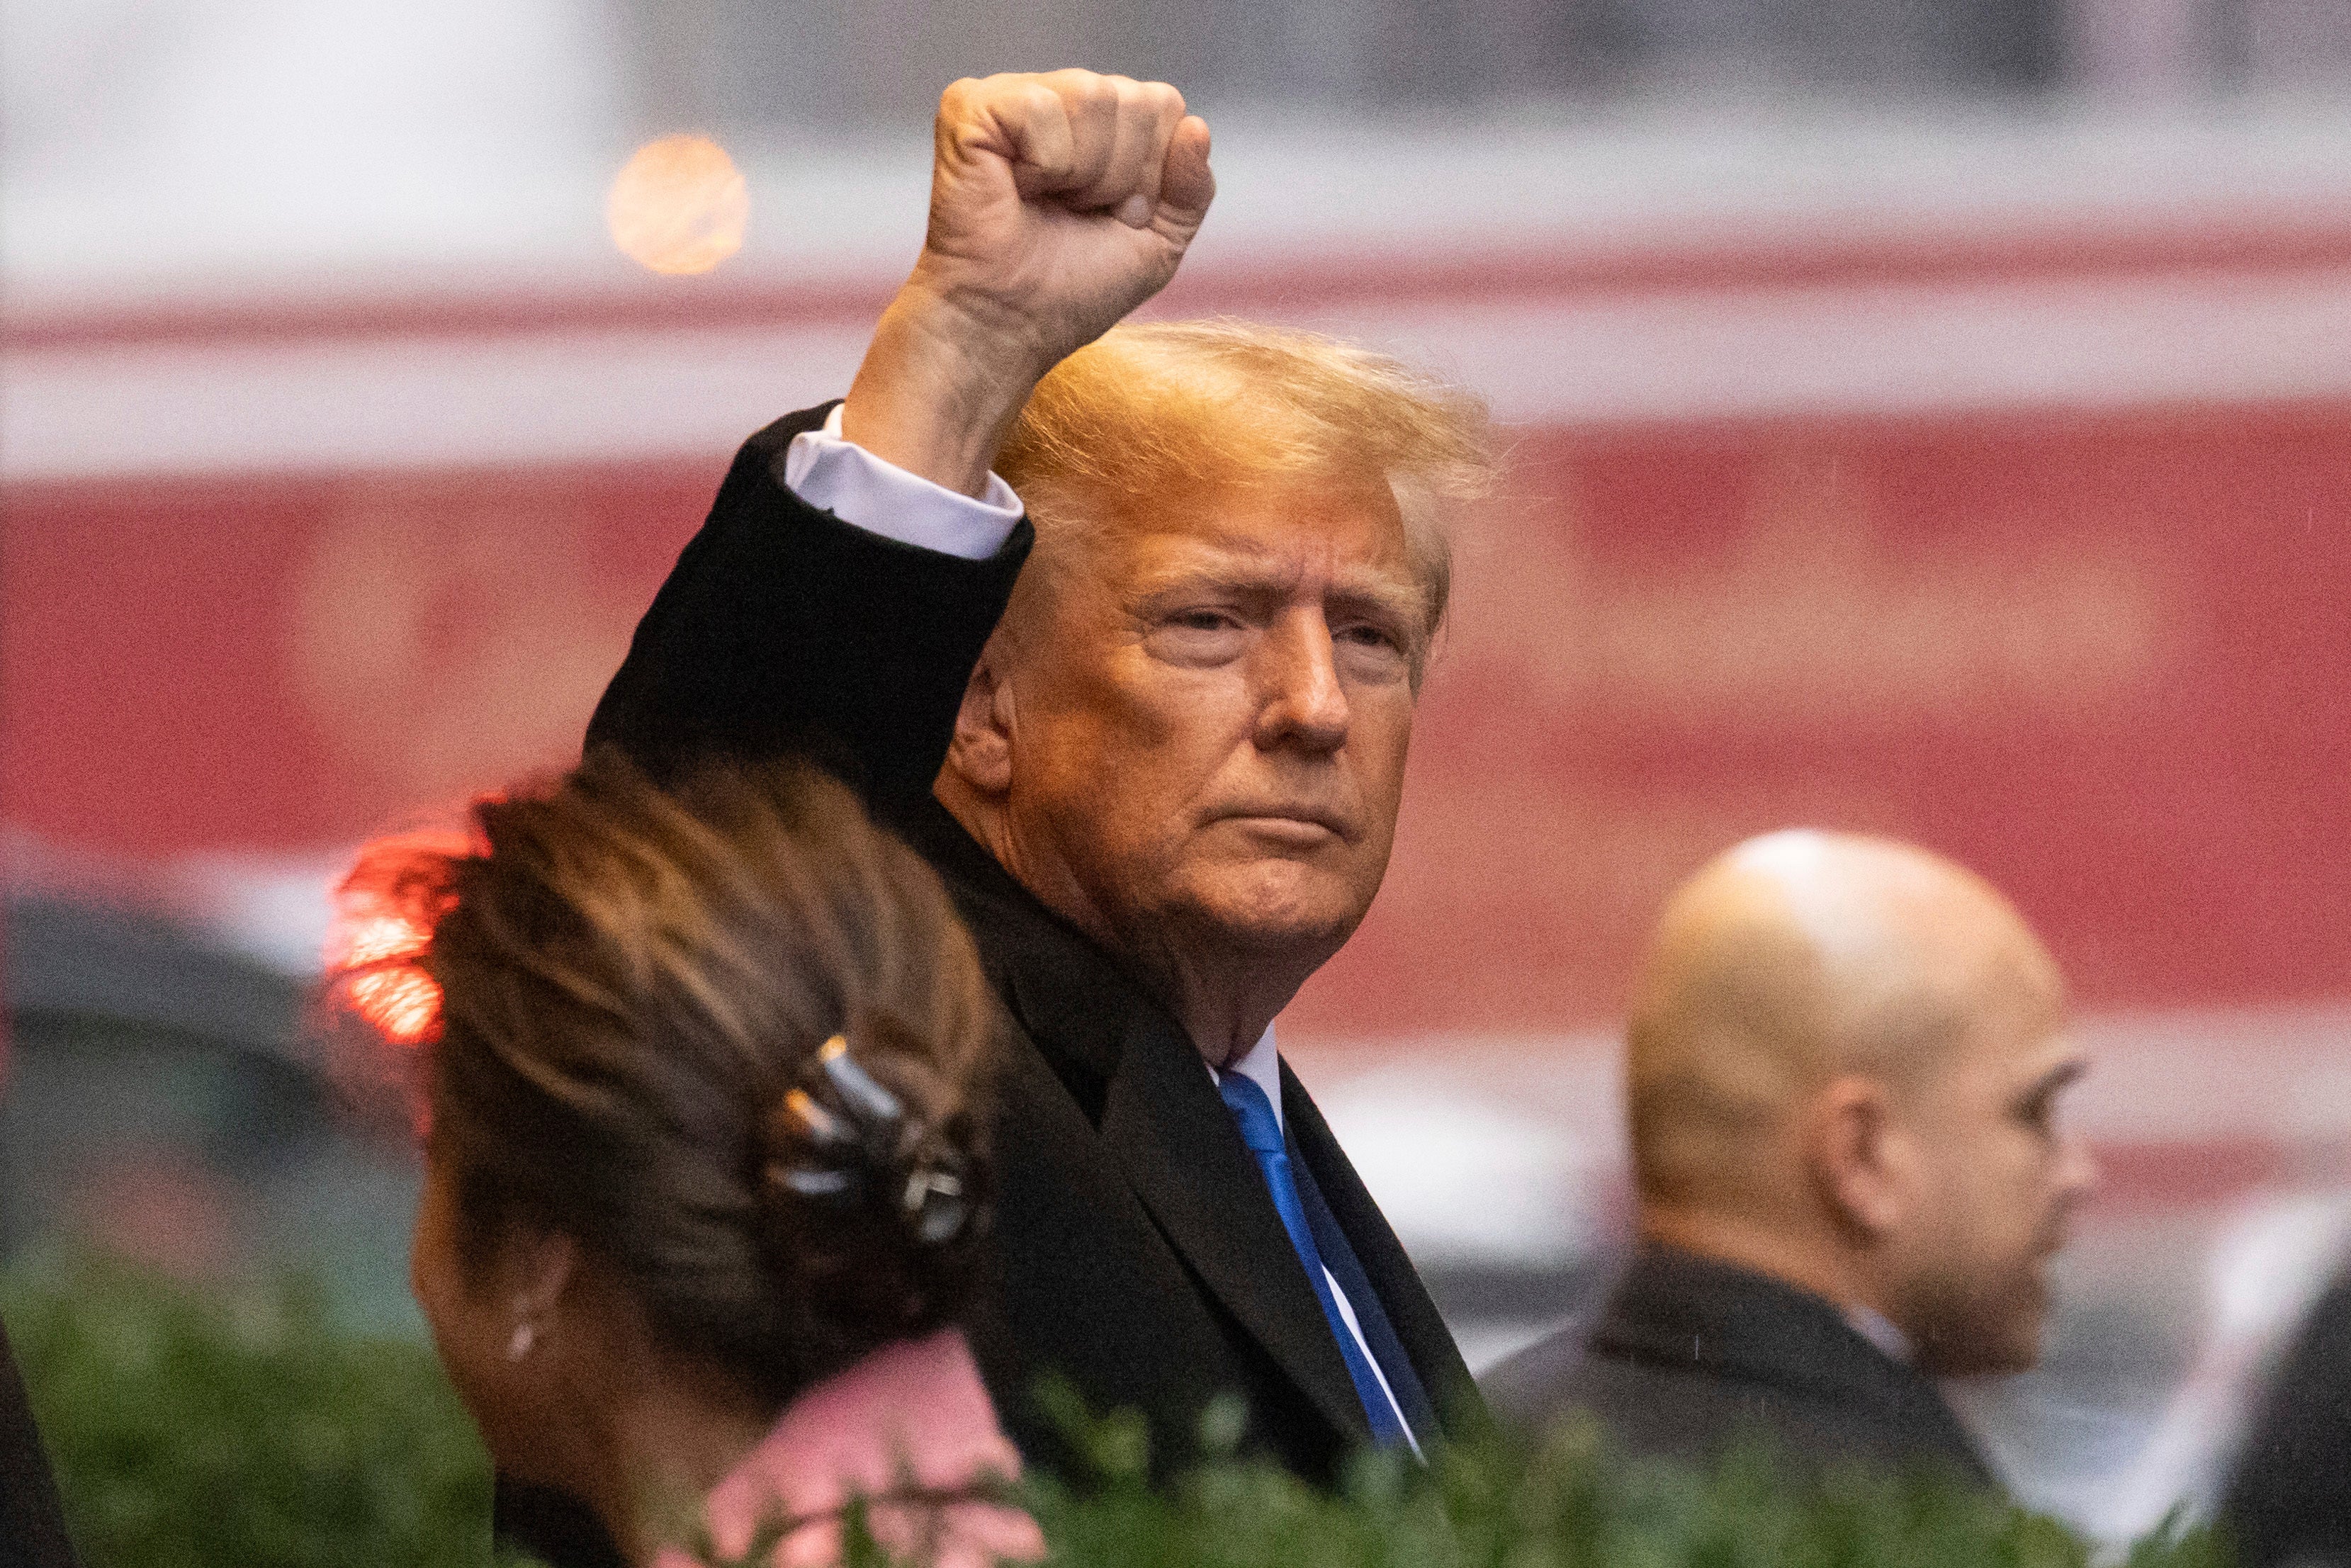 Trump raises his fist as he leaves his apartment